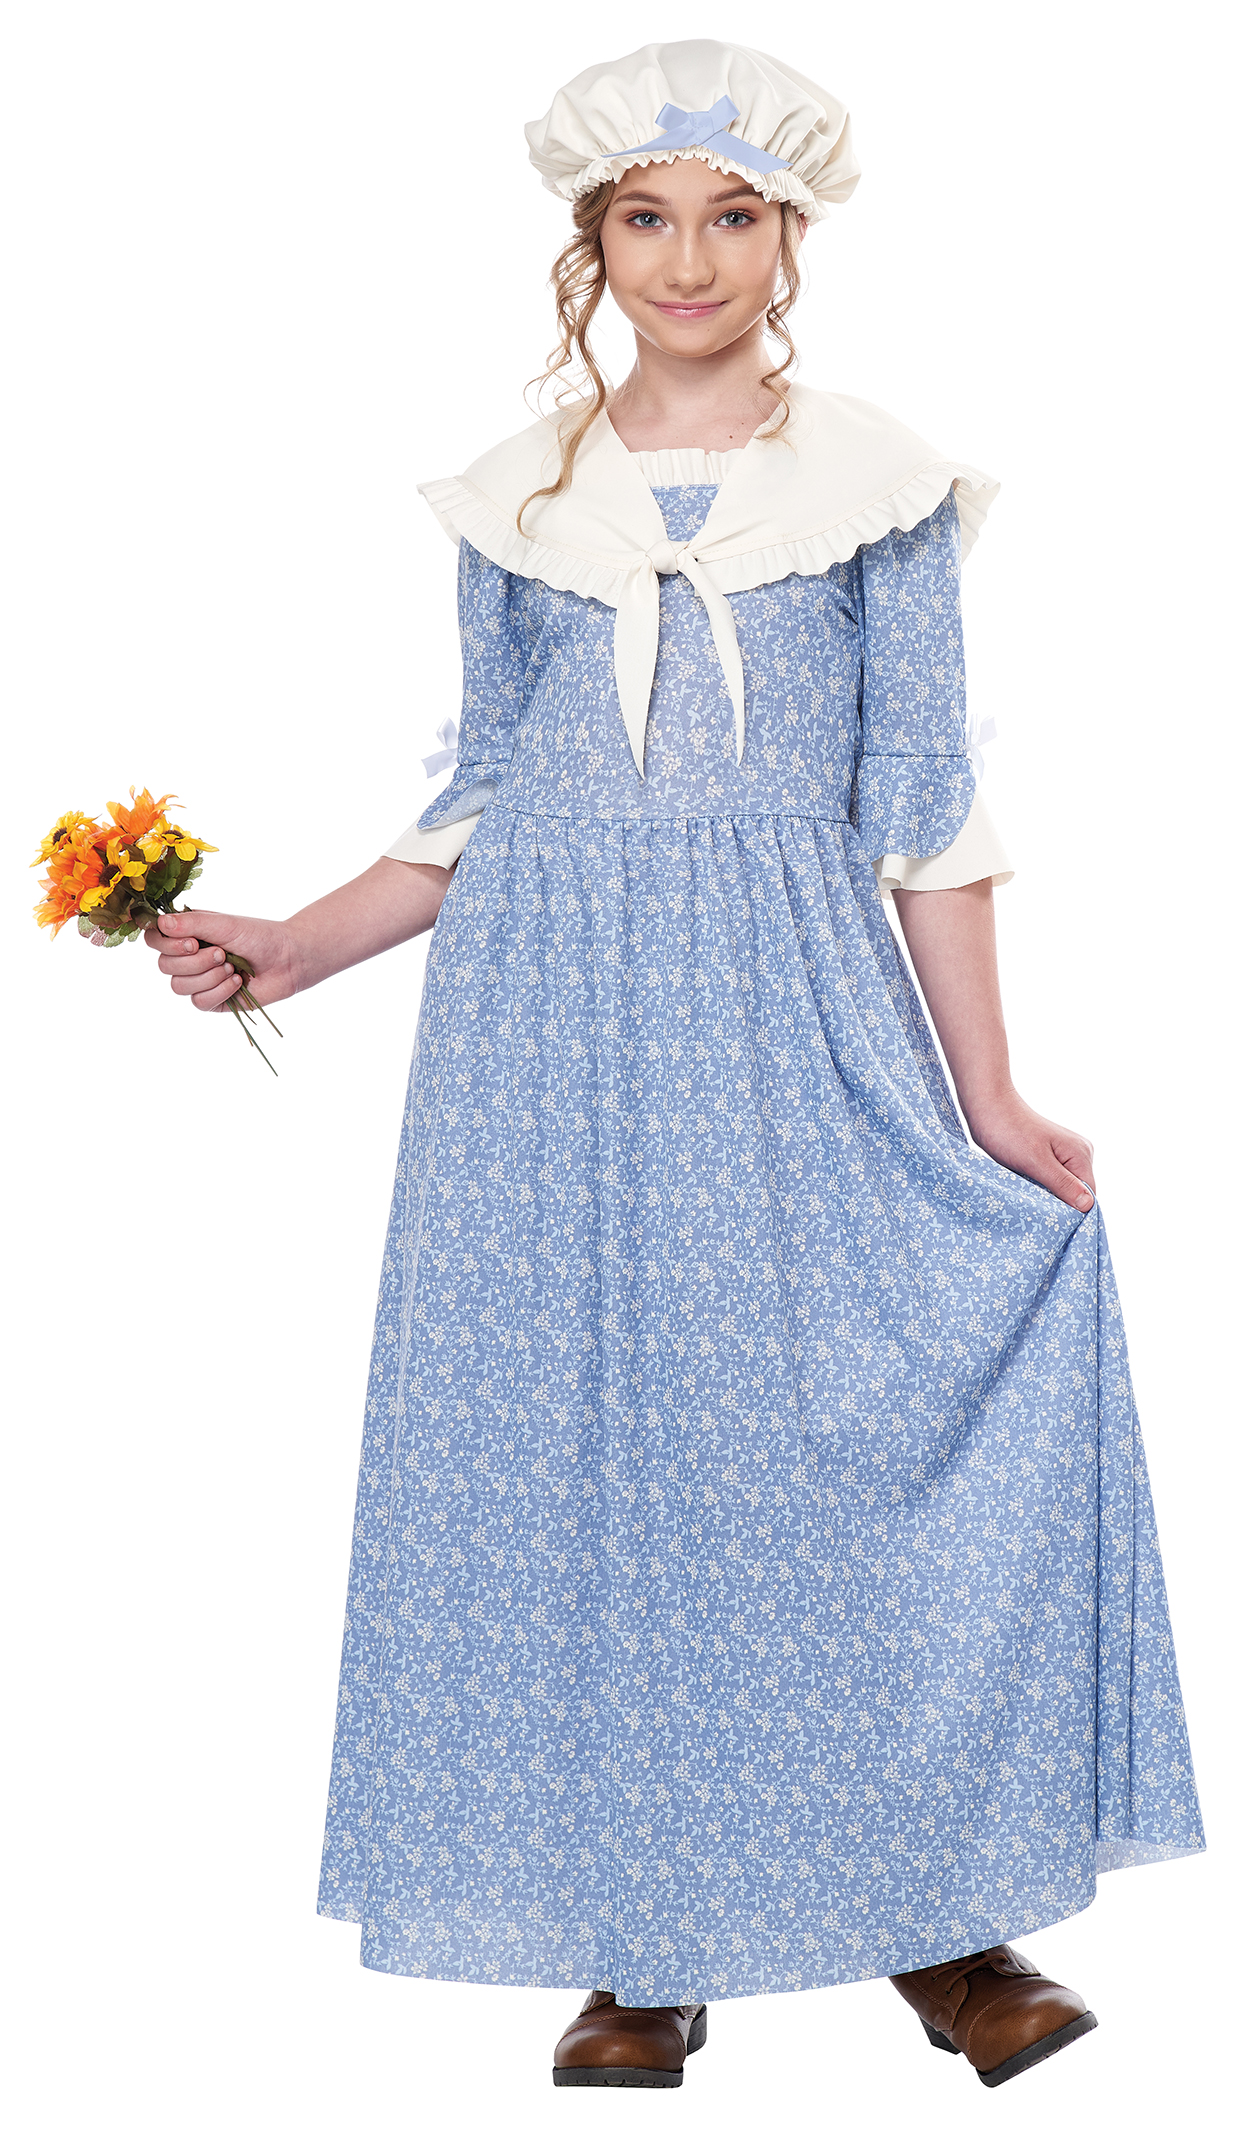 Kids Colonial Village Girls Costume | $30.99 | The Costume Land